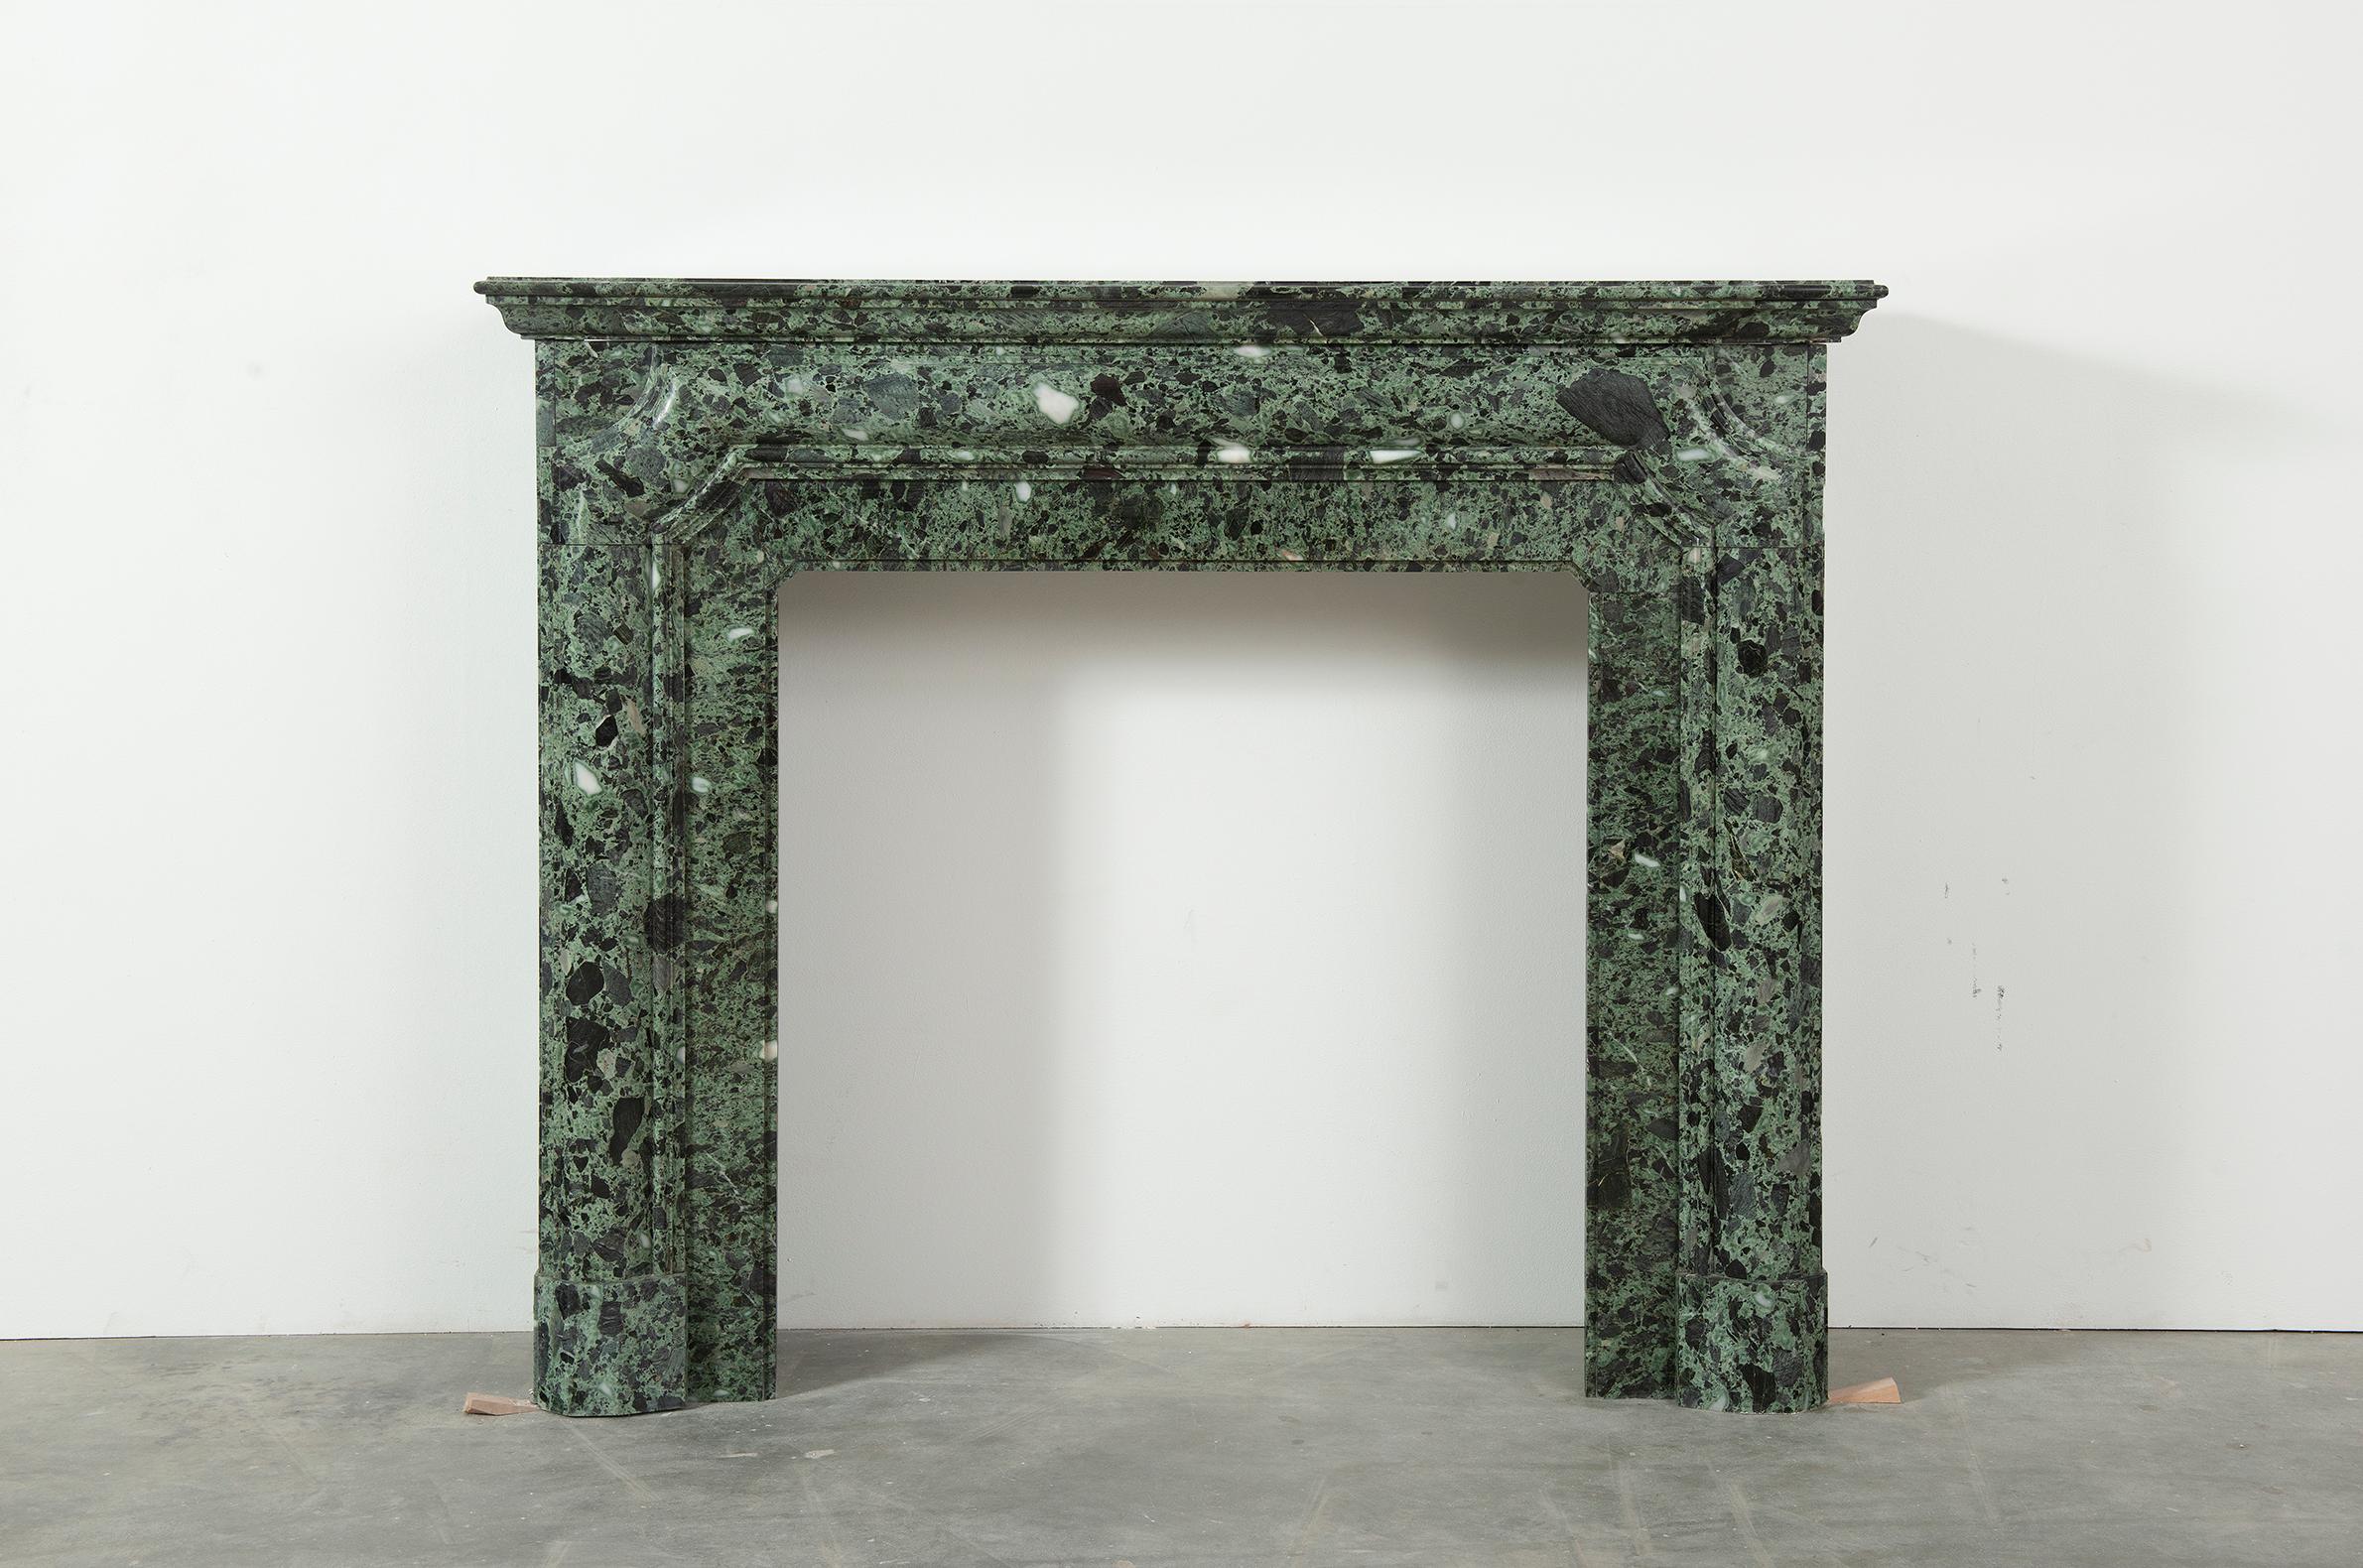 A very nice 19th Century fireplace mantel in Verde Antico marble, this lovely green, white-mottled marble has a beautiful high polished gloss. 
The nice tall ratio of this mantel makes it very suitable for smaller spaces with high ceilings, is can